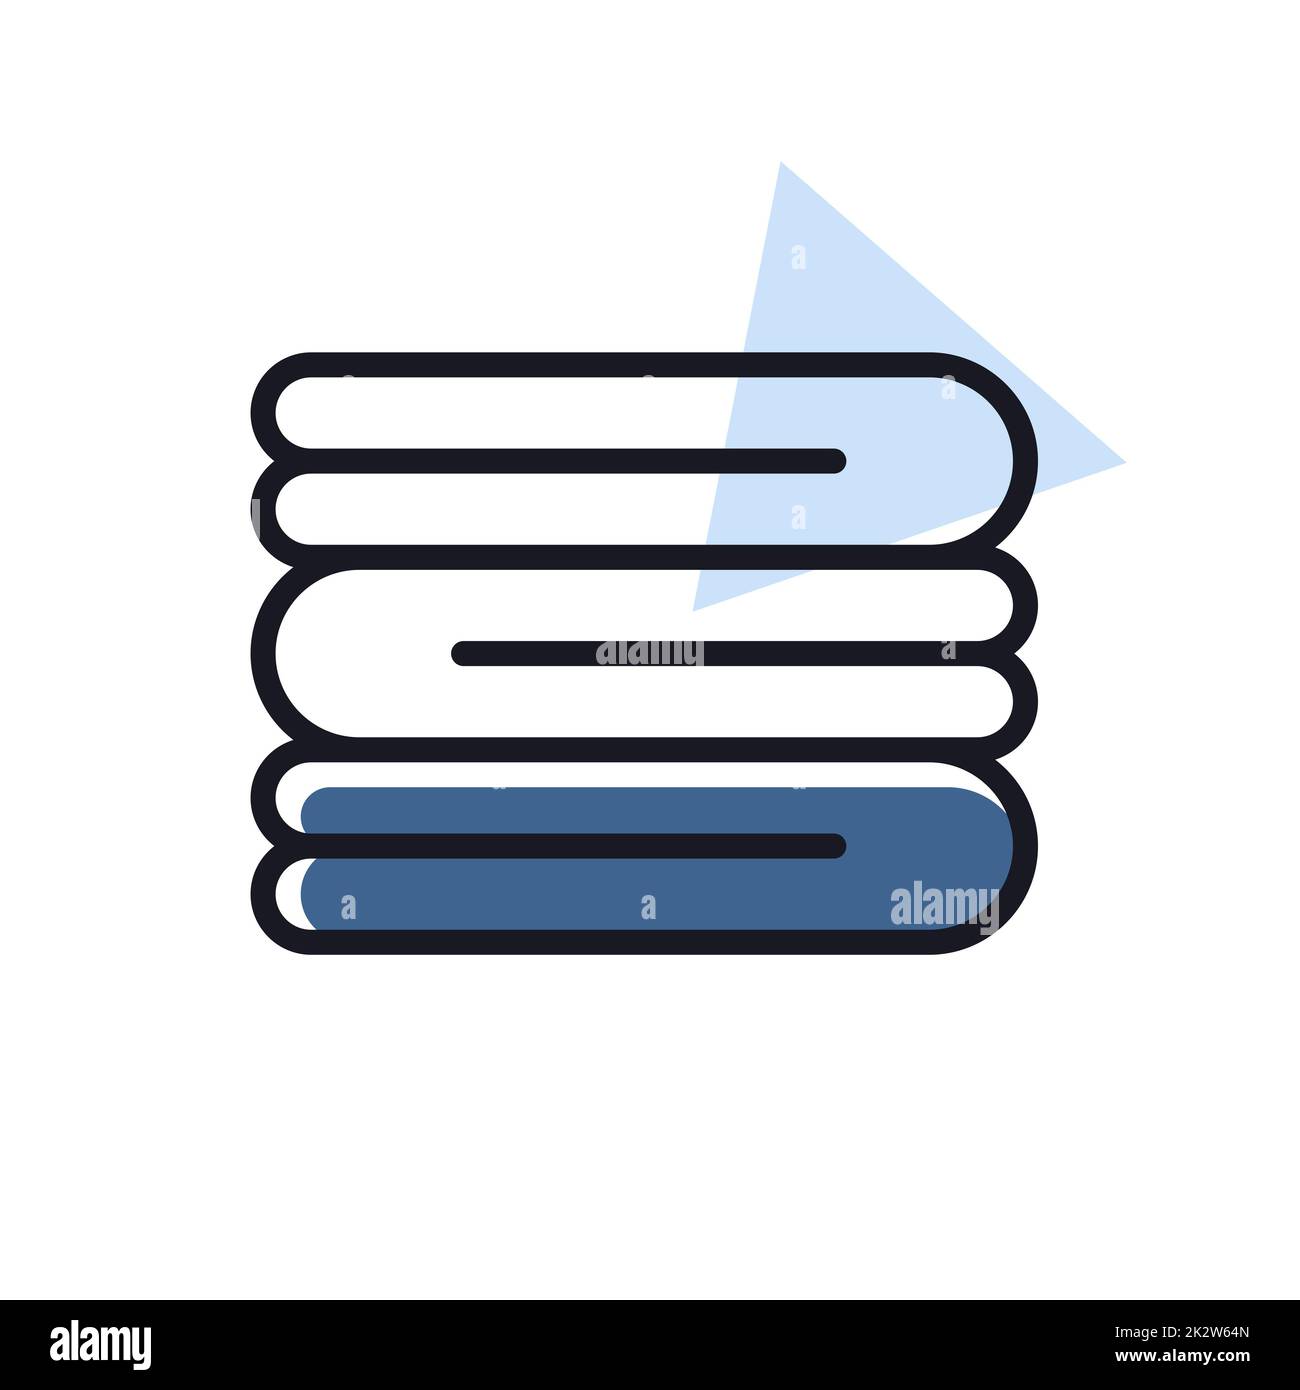 Stack of folded bath towels or napkins vector icon Stock Photo